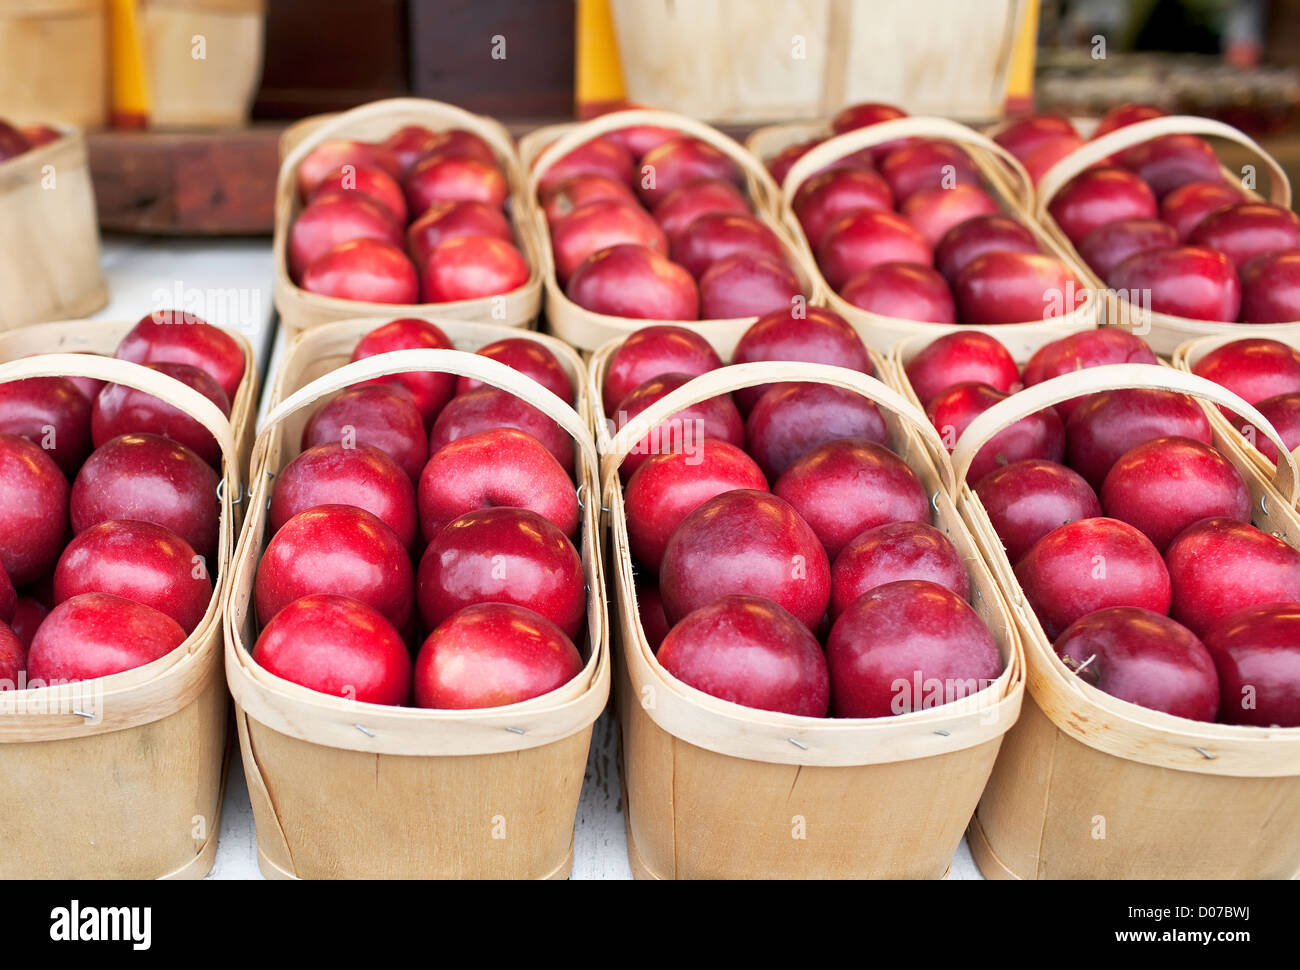 Red apples in baskets Stock Photo